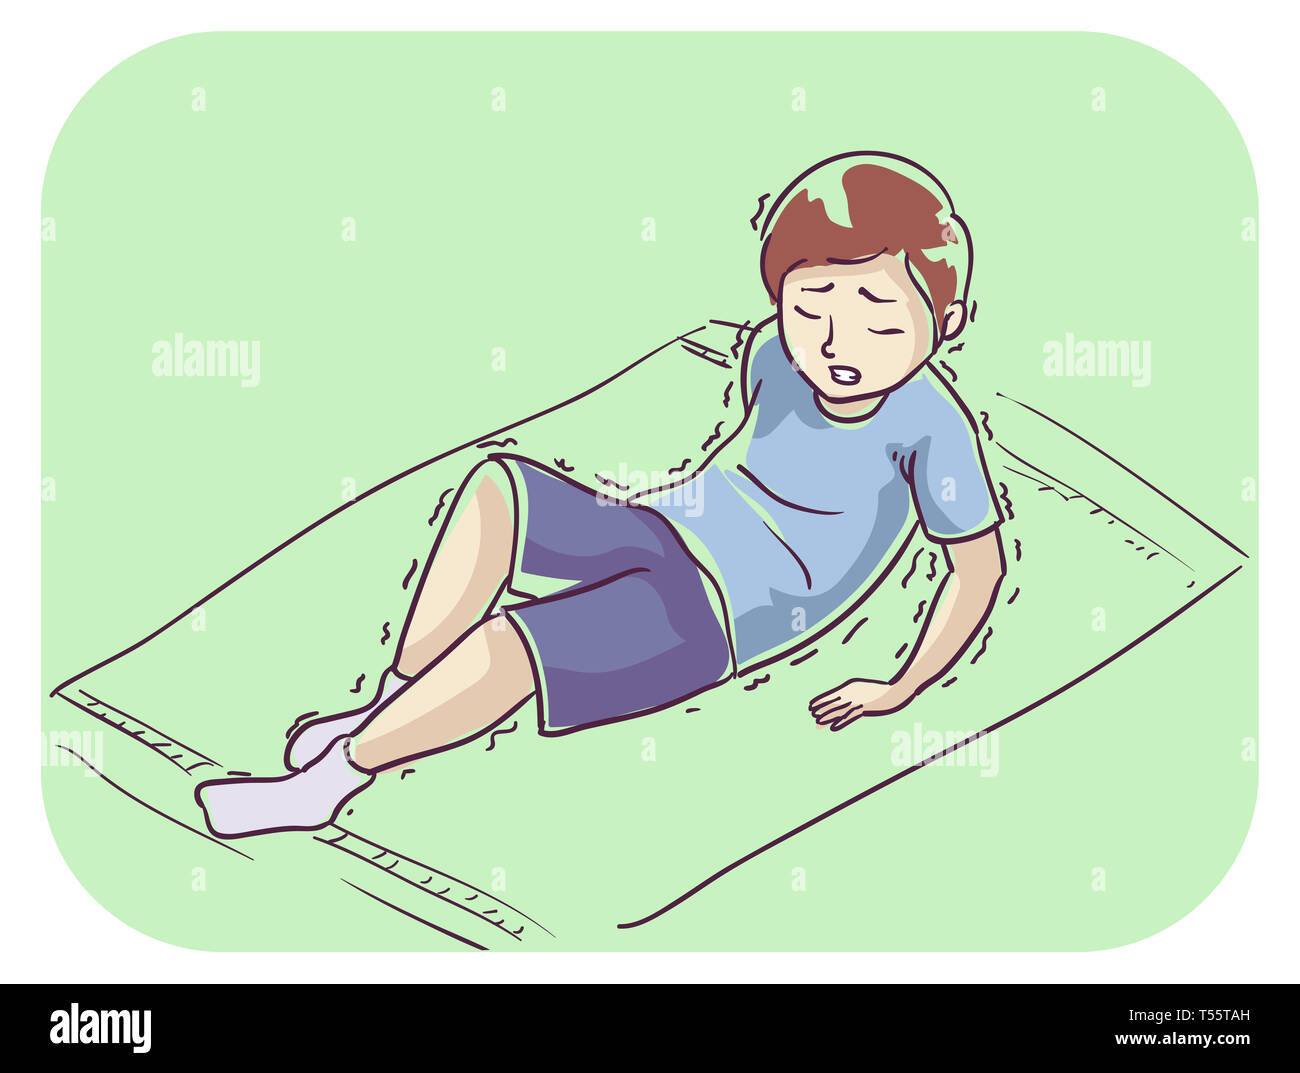 Illustration of a Kid Boy a Kid Boy who Cannot Stand Up from Lying Position Stock Photo